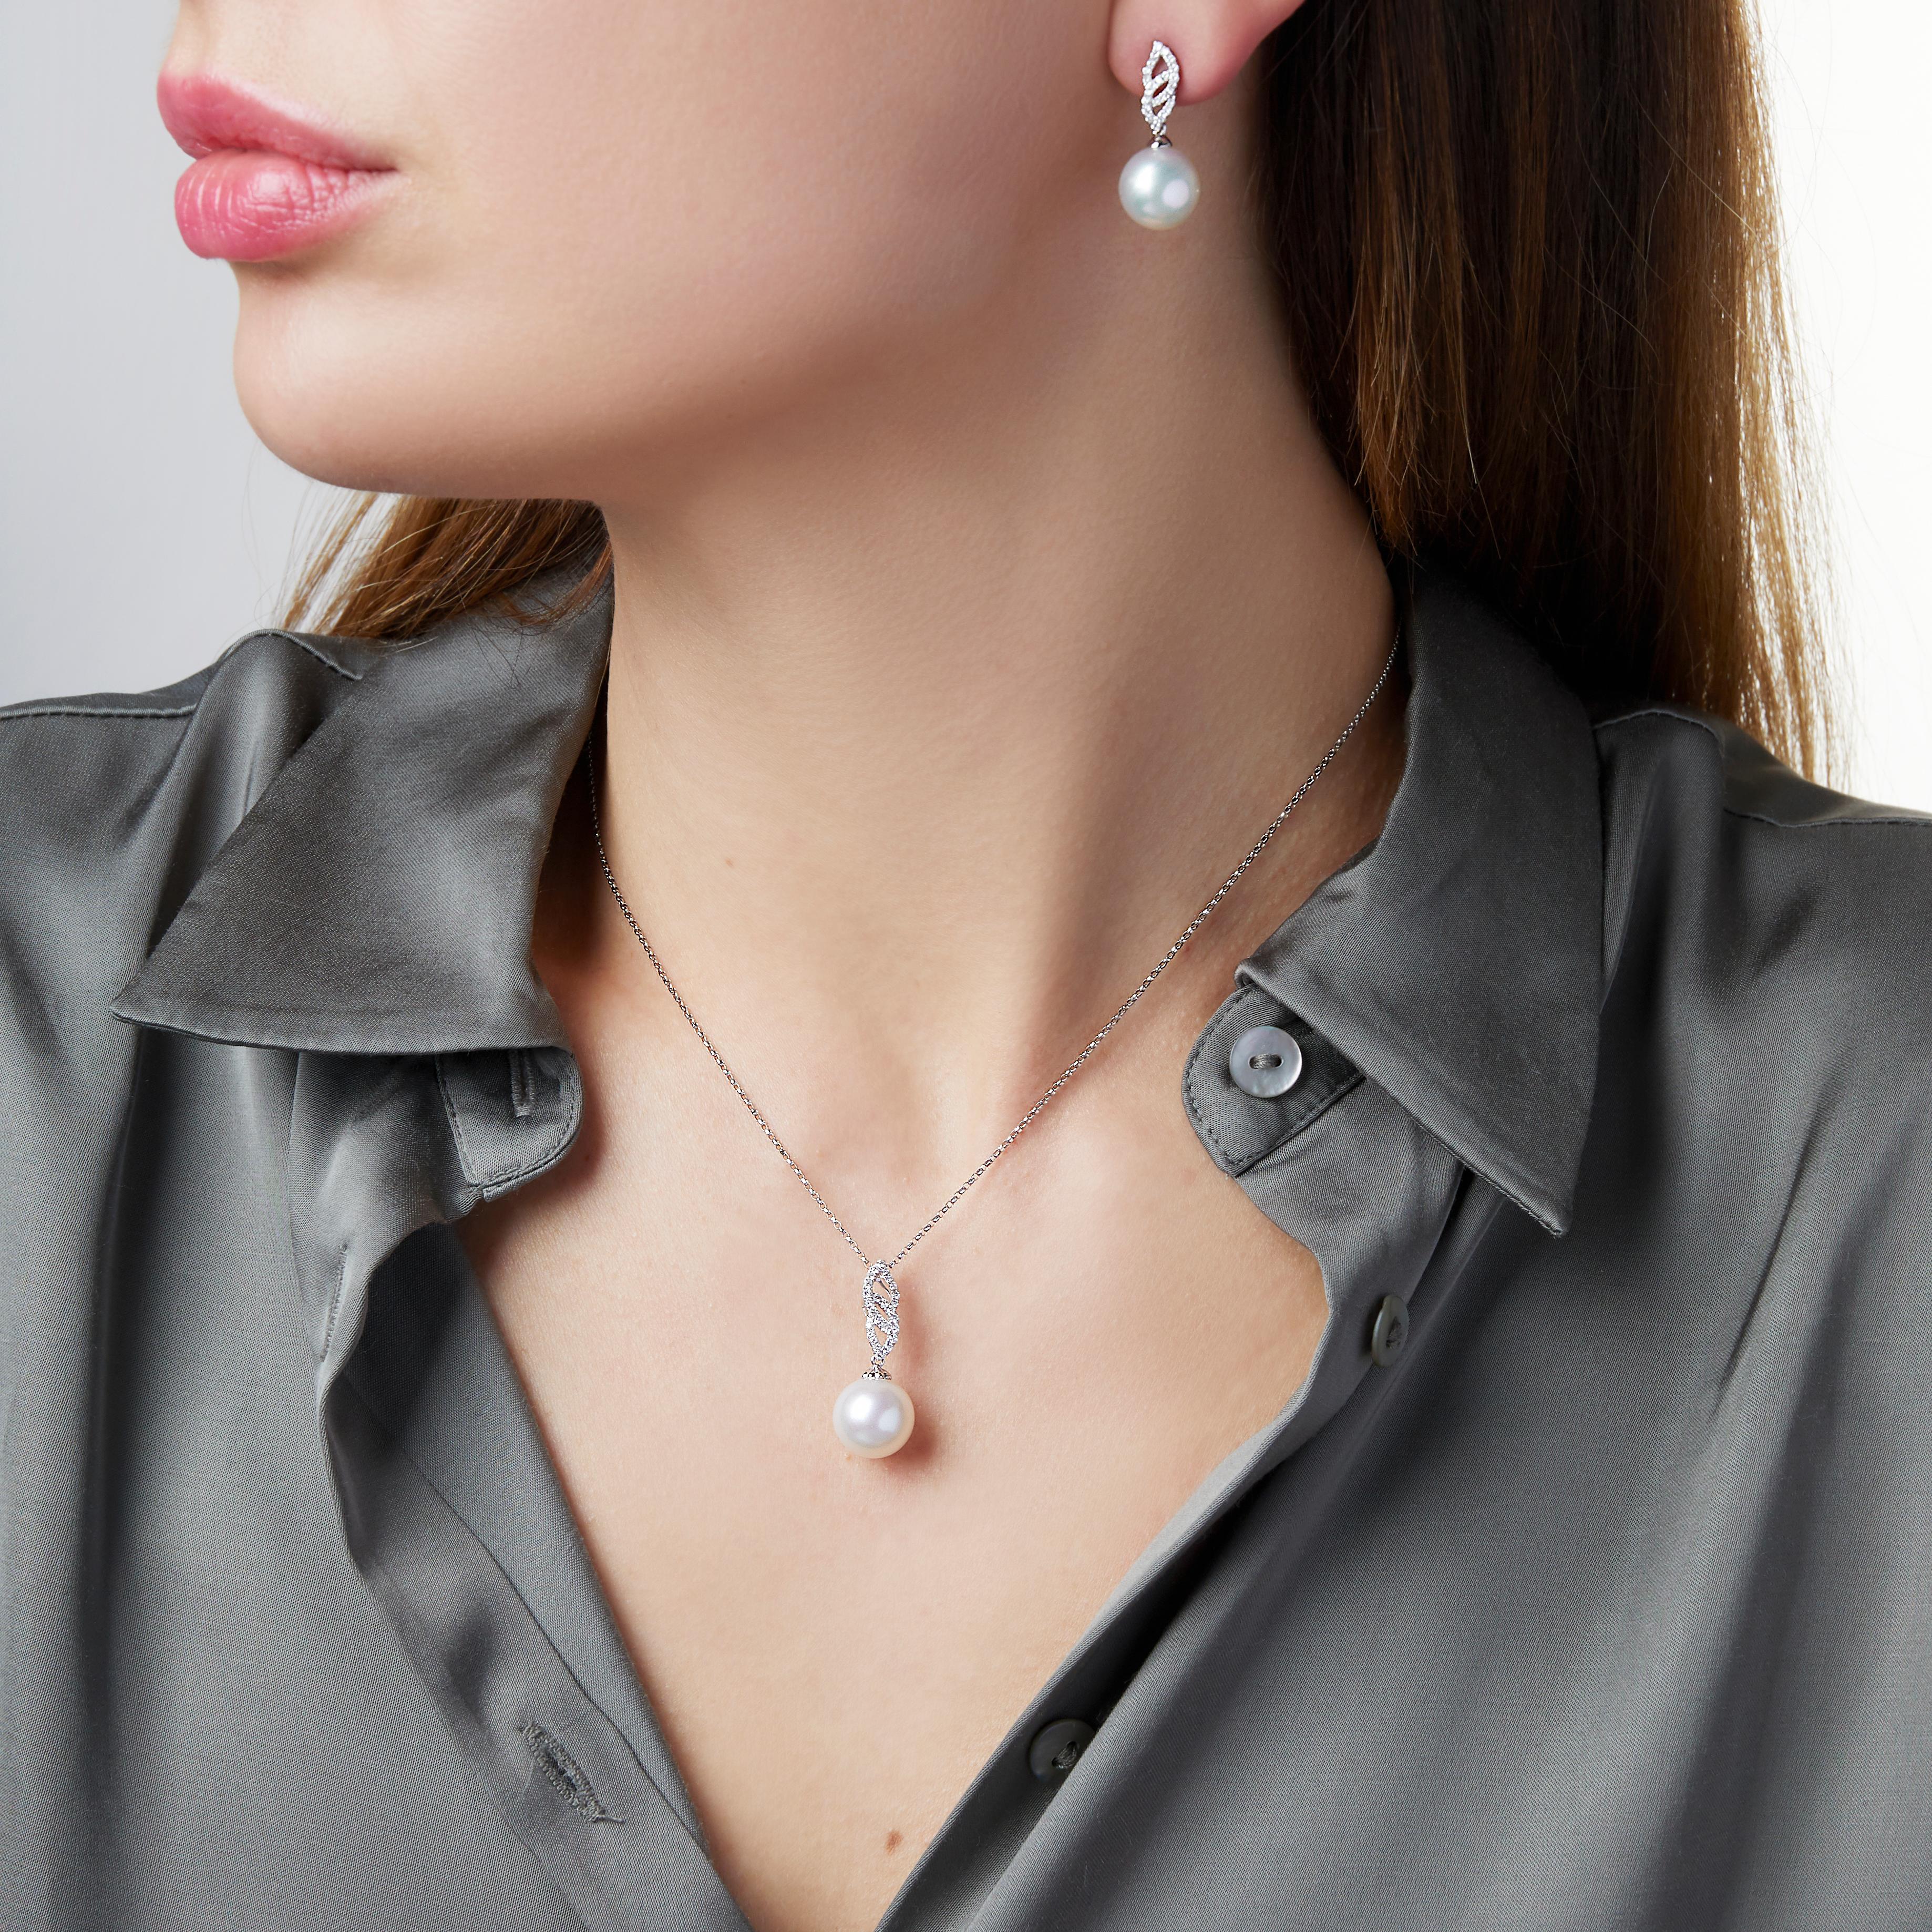 This unique pendant by Yoko London features a spectacular 11-12mm Australian South Sea pearl, set beneath a delicate diamond motif. Handcrafted in our London workshop, this pendant has been completed to exacting standards. Pair with the matching